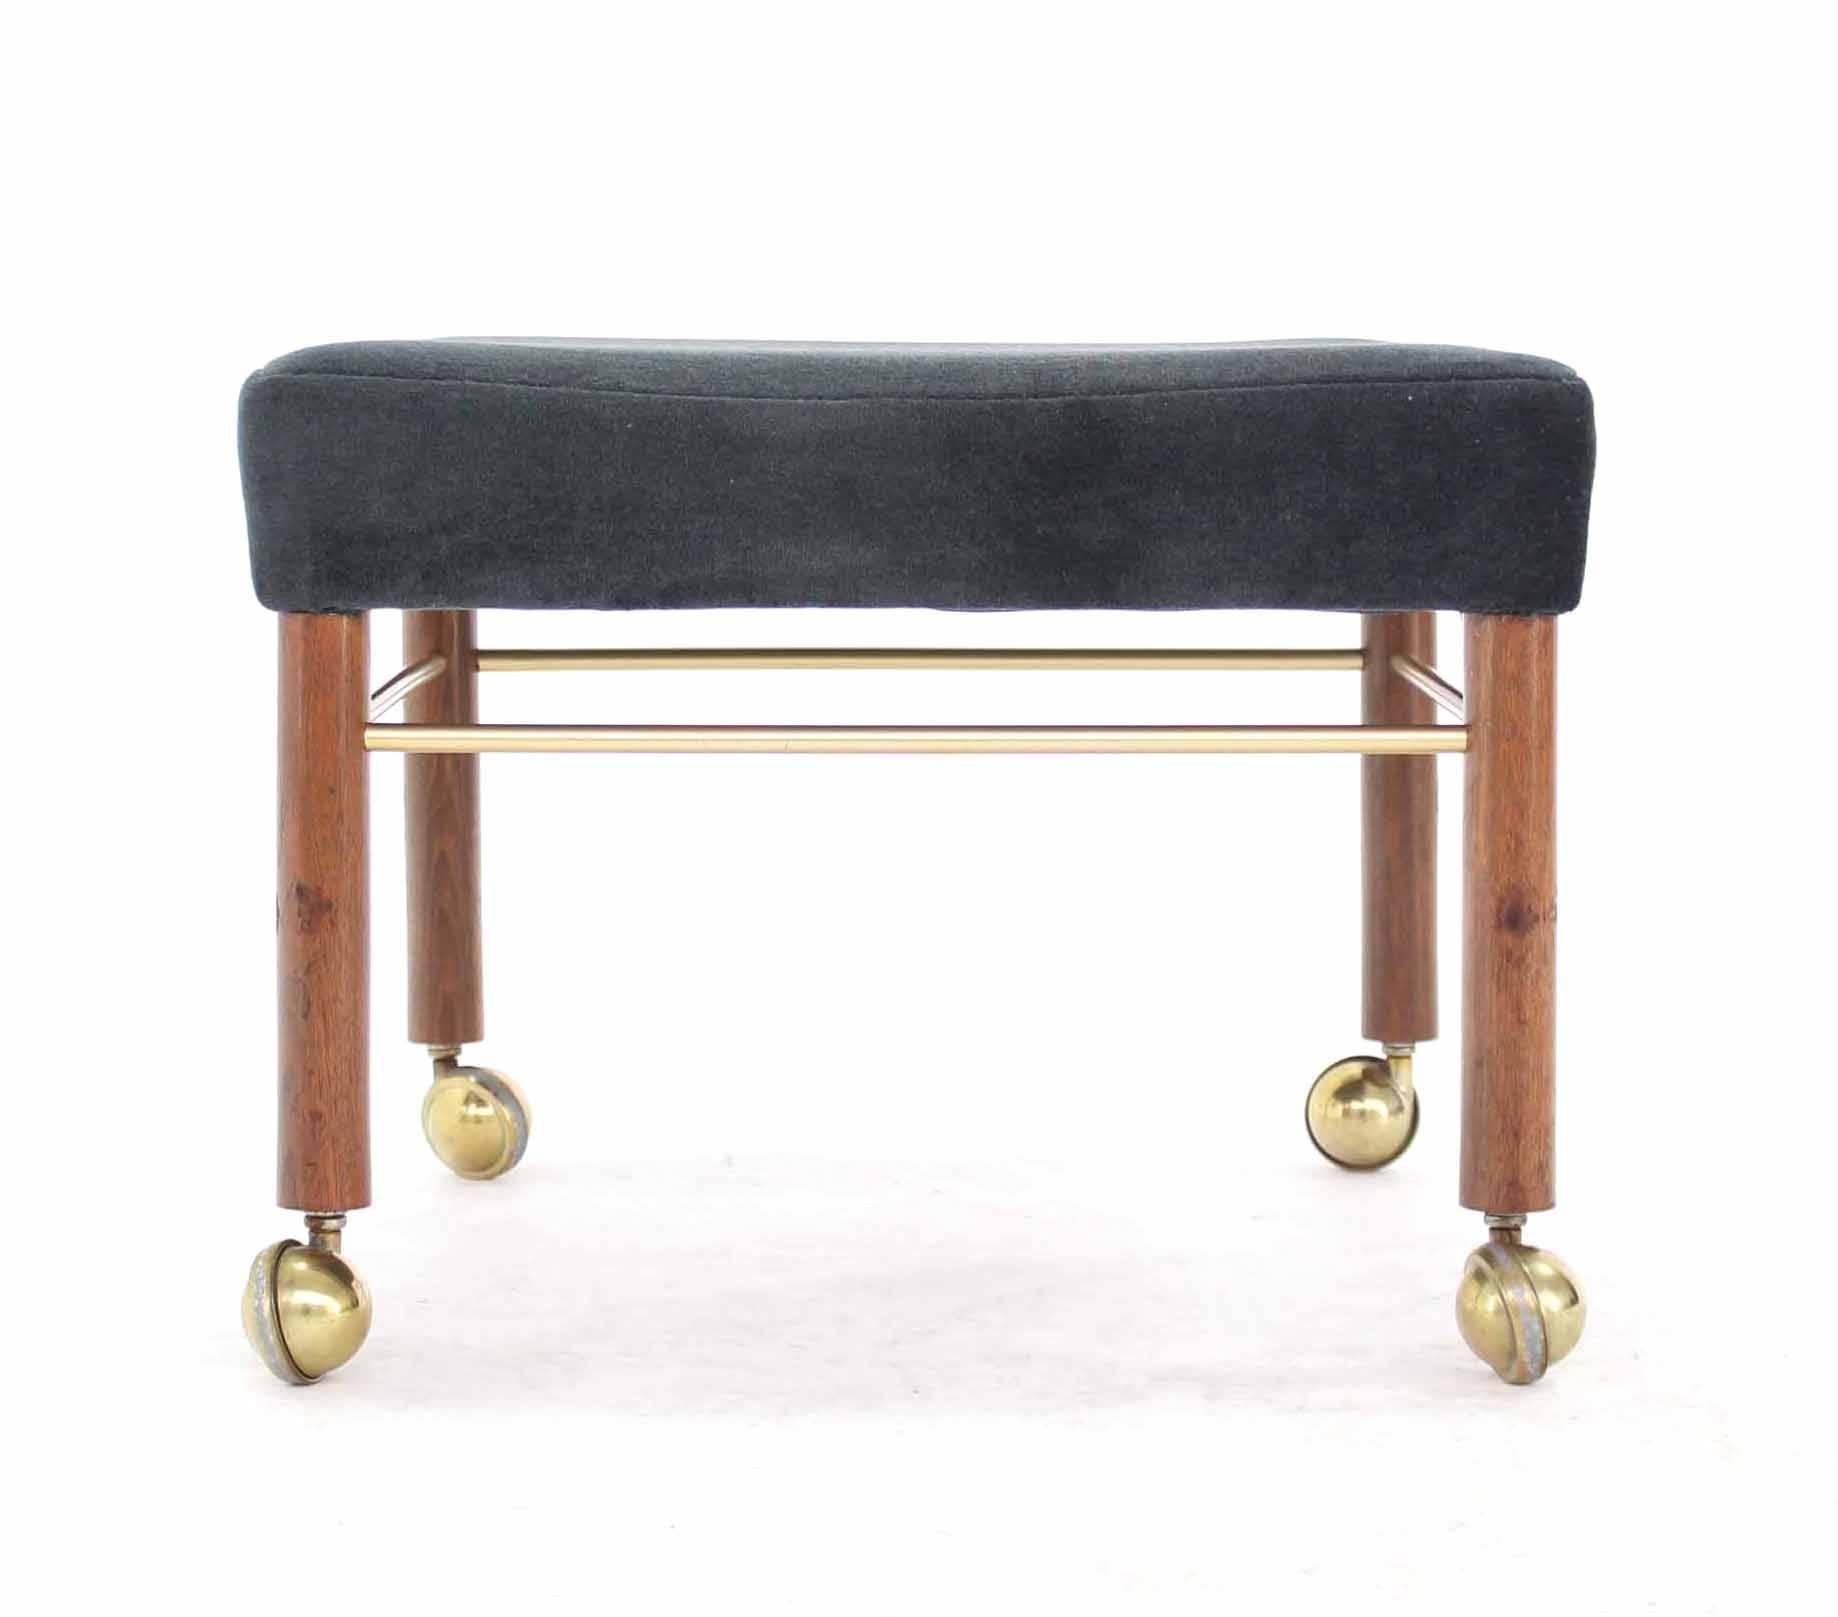 Brass Square Newly Upholstered in Black or Charcoal Mohair Bench